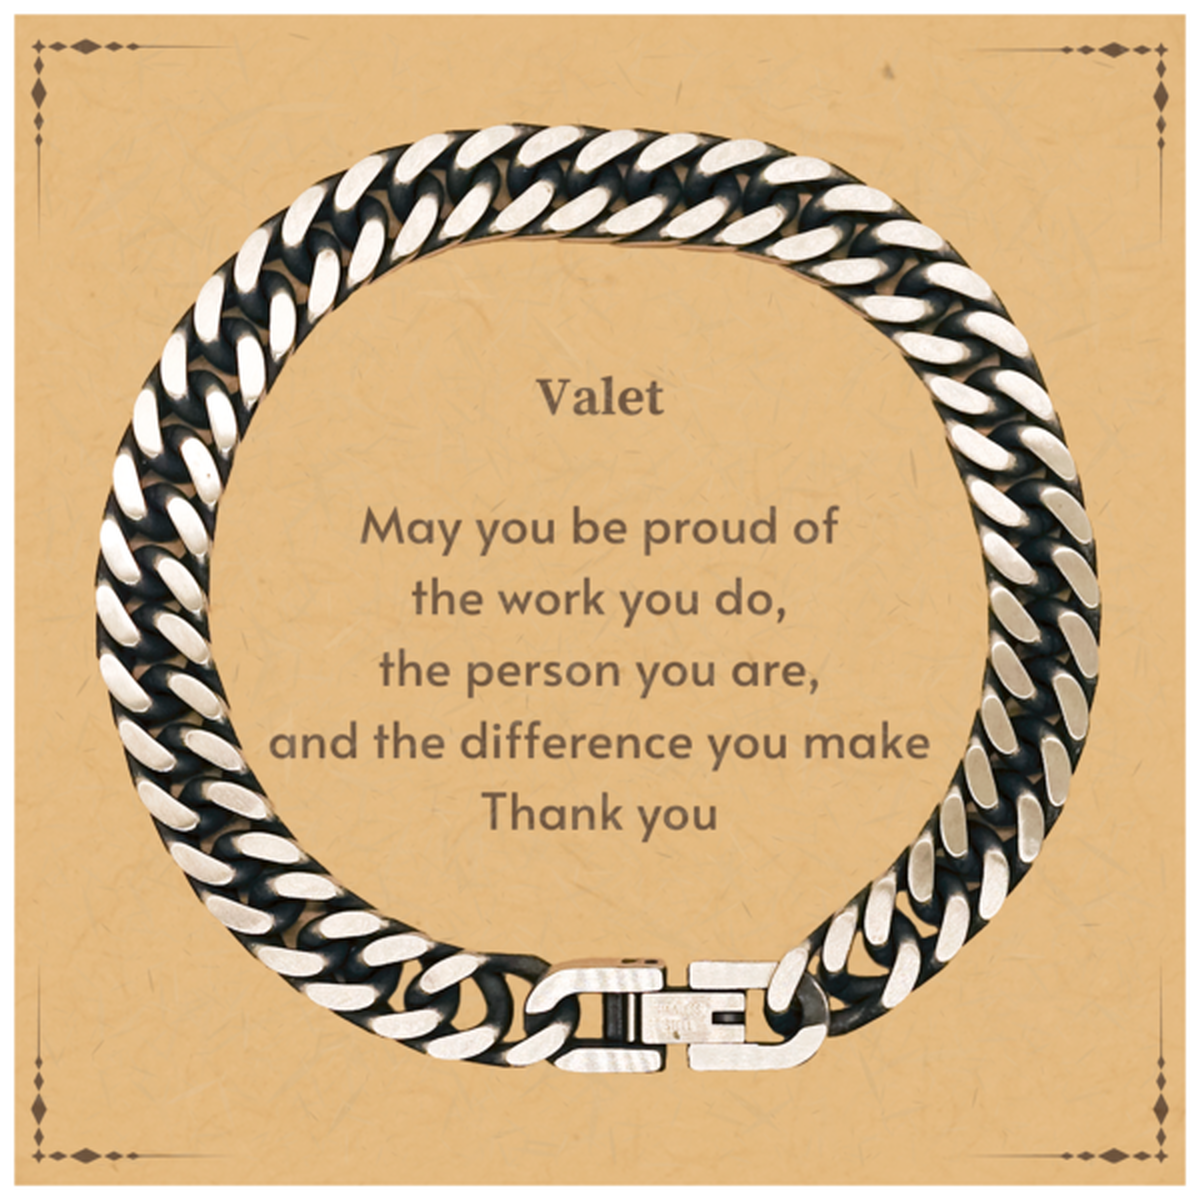 Heartwarming Cuban Link Chain Bracelet Retirement Coworkers Gifts for Valet, Valet May You be proud of the work you do, the person you are Gifts for Boss Men Women Friends